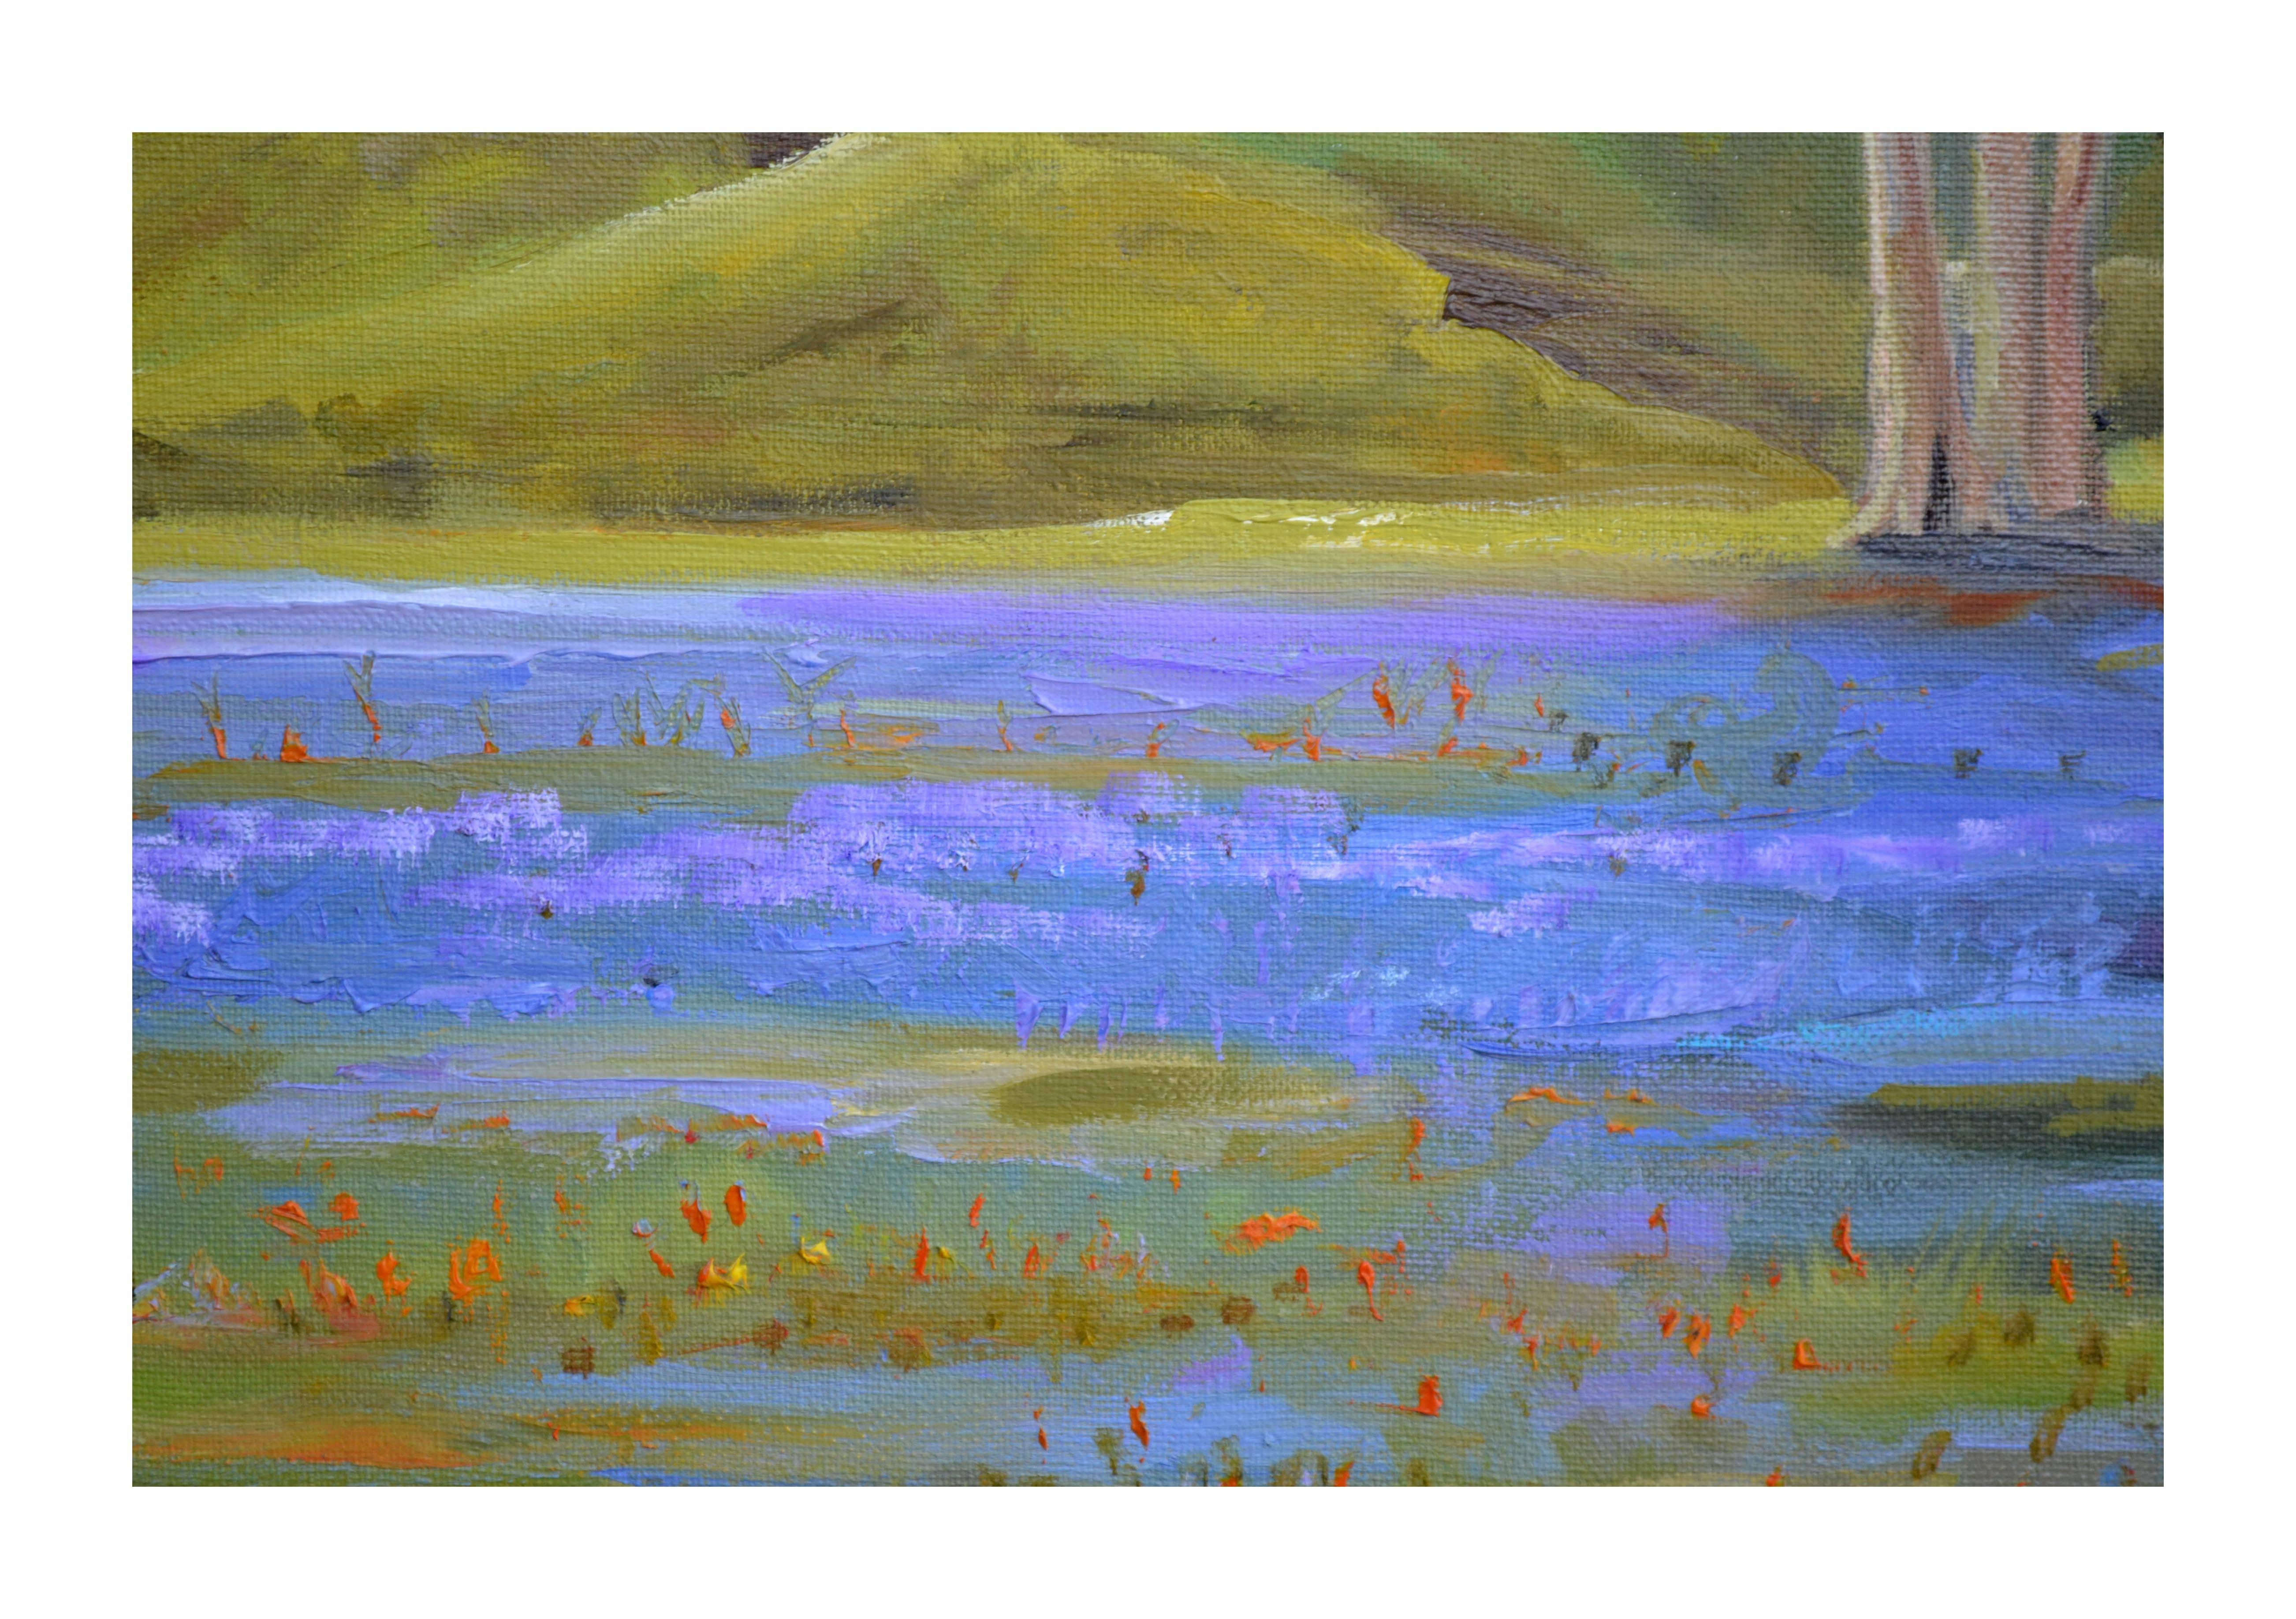 California Lupine Fields - Landscape with Wildflowers  - Painting by Kathleen Murray